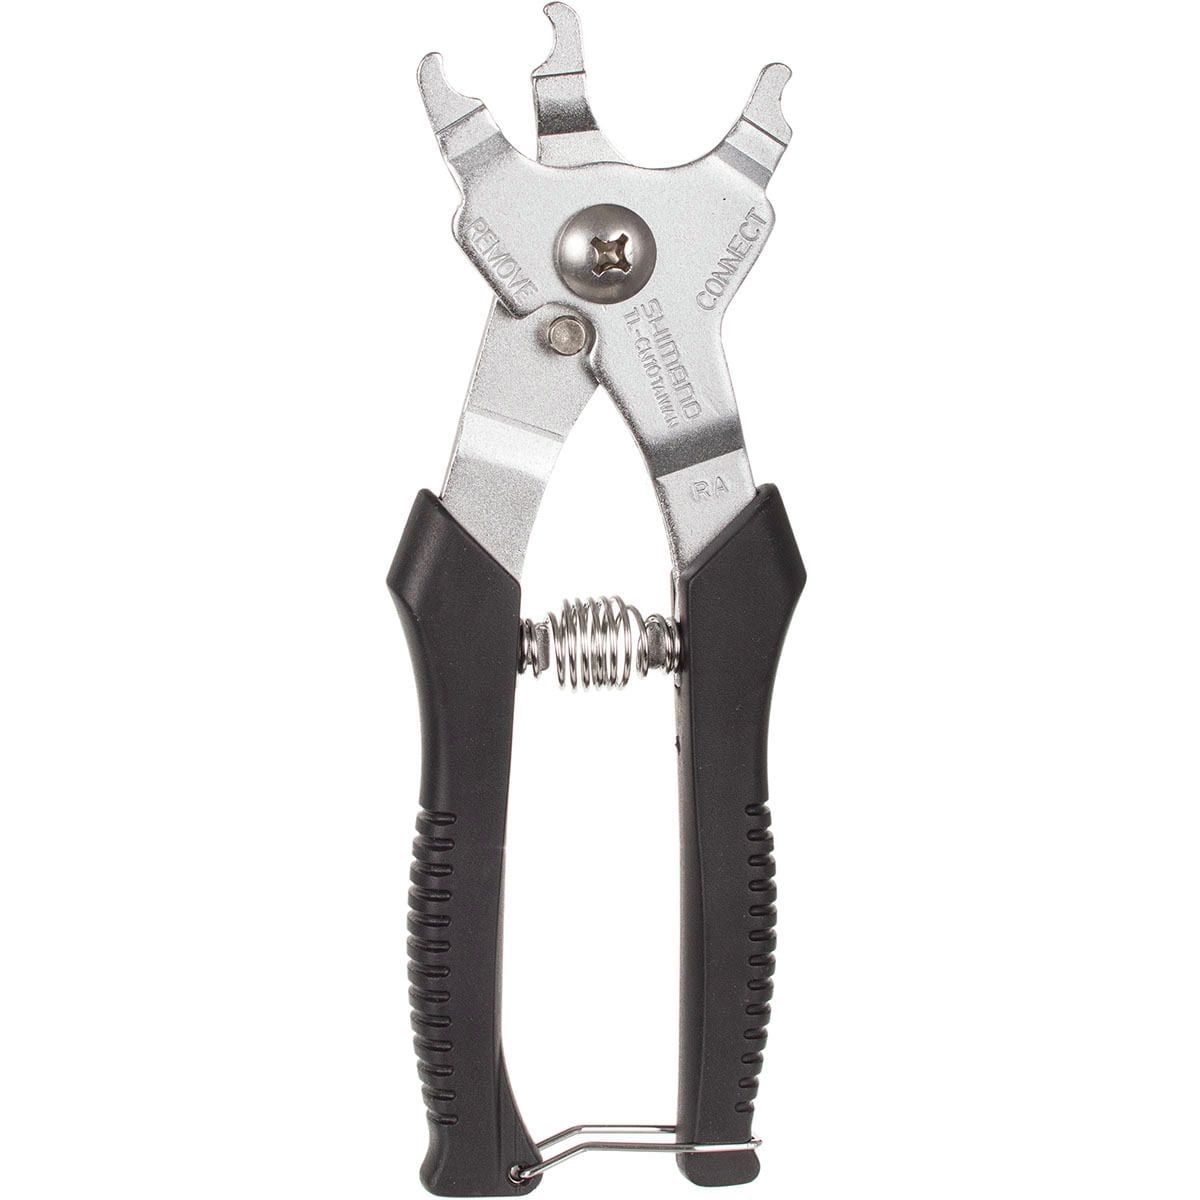 Shimano SM-CN10 Quick Link Chain Tool